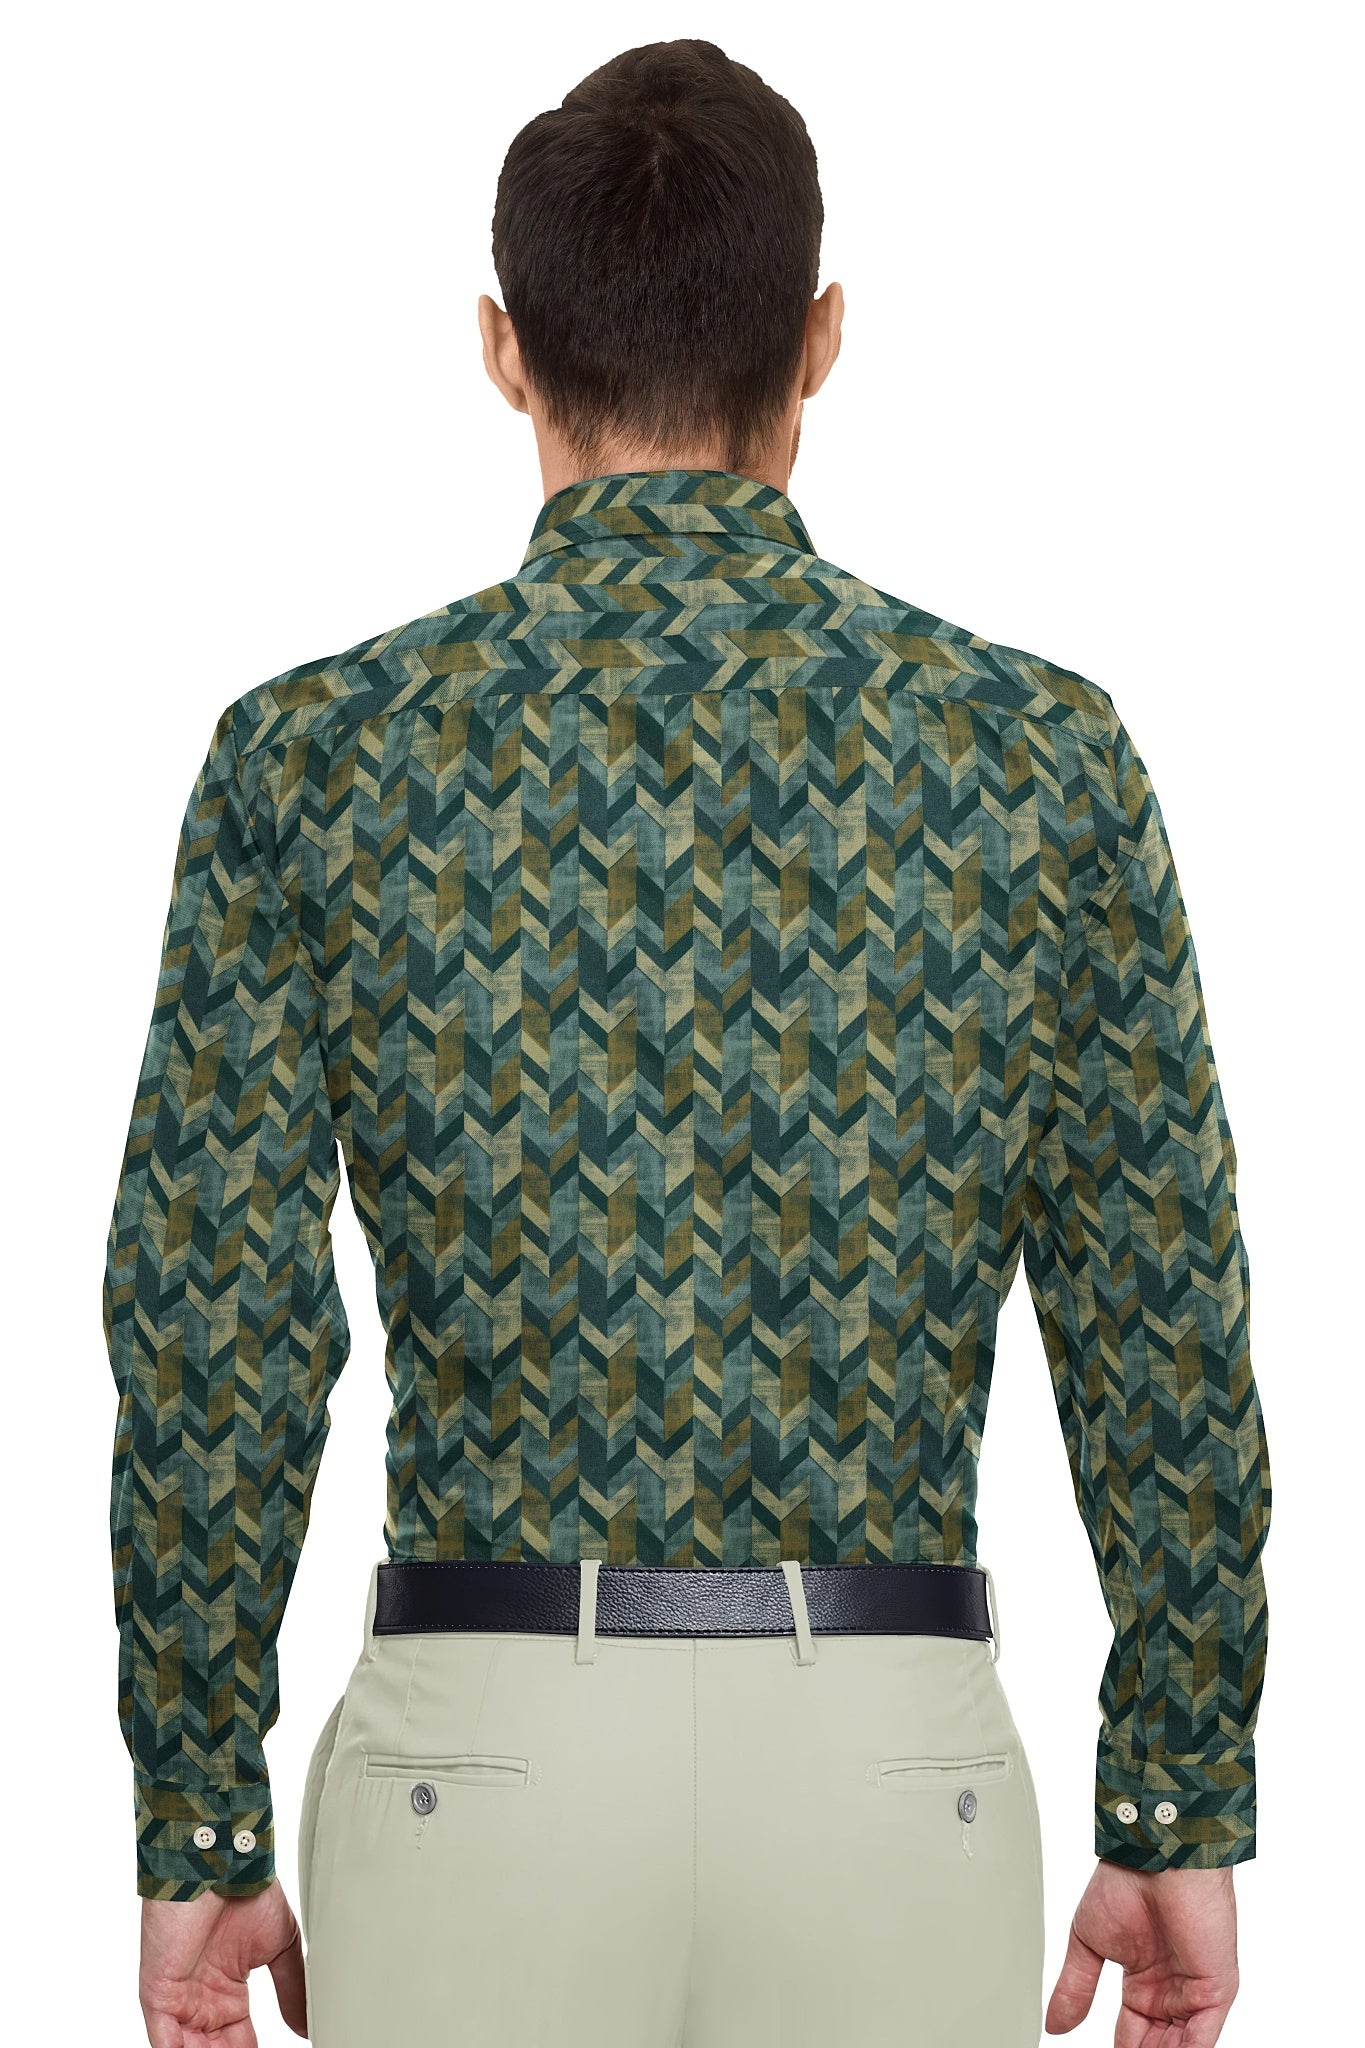 Beige and Phthalo Green Chevron Stripes Printed Cotton Shirt